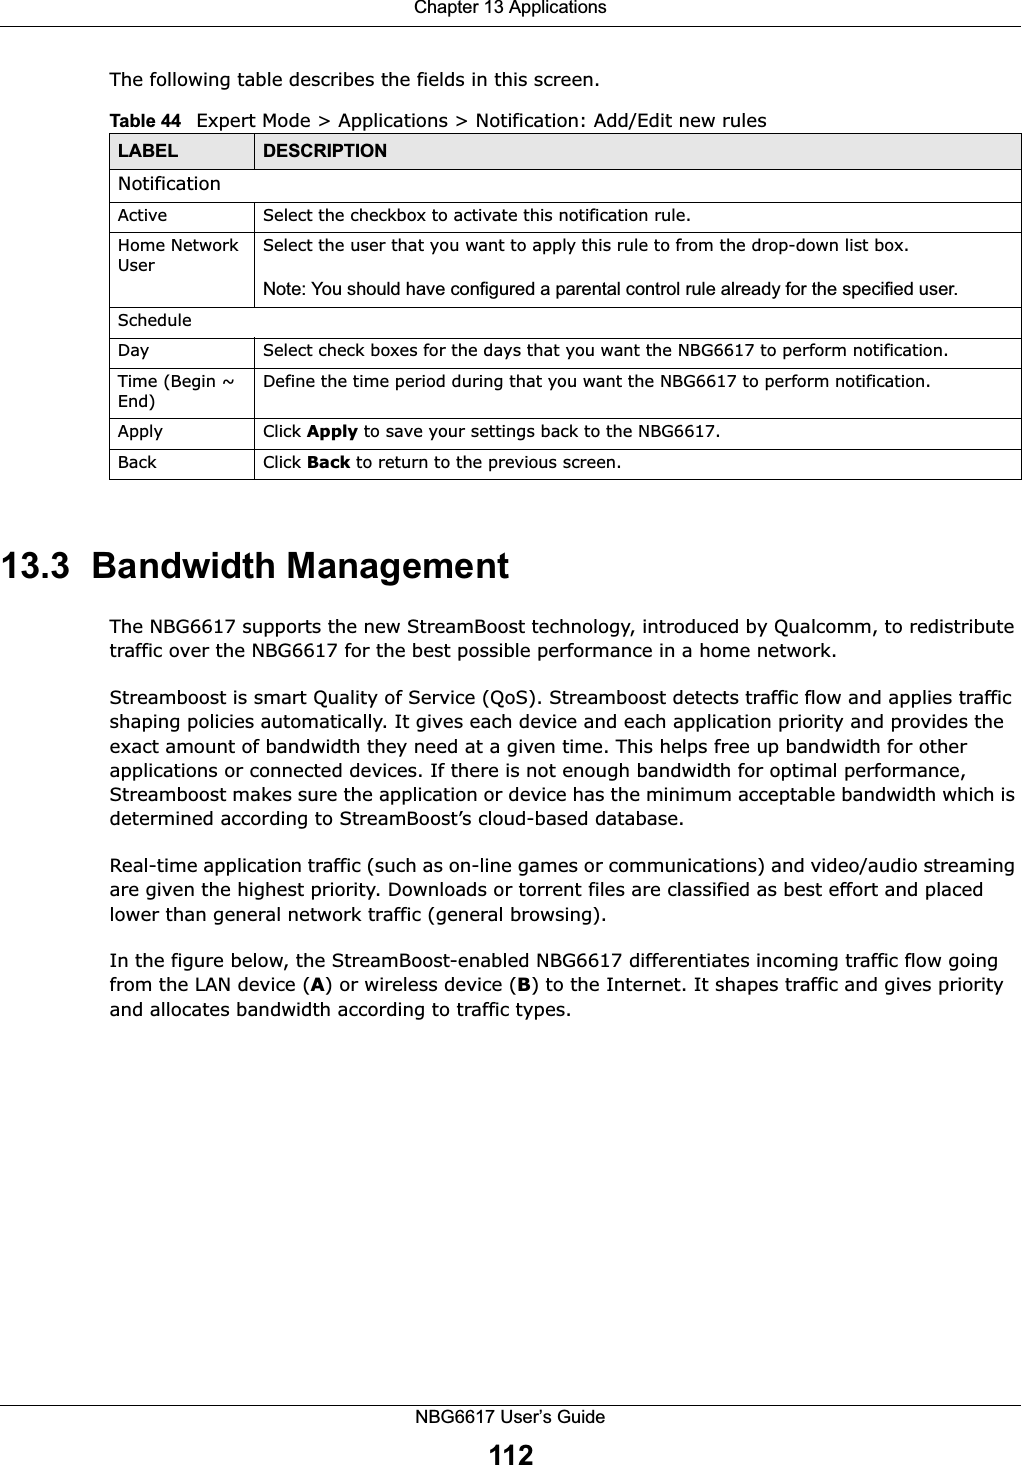 Chapter 13 ApplicationsNBG6617 User’s Guide112The following table describes the fields in this screen. 13.3  Bandwidth ManagementThe NBG6617 supports the new StreamBoost technology, introduced by Qualcomm, to redistribute traffic over the NBG6617 for the best possible performance in a home network. Streamboost is smart Quality of Service (QoS). Streamboost detects traffic flow and applies traffic shaping policies automatically. It gives each device and each application priority and provides the exact amount of bandwidth they need at a given time. This helps free up bandwidth for other applications or connected devices. If there is not enough bandwidth for optimal performance, Streamboost makes sure the application or device has the minimum acceptable bandwidth which is determined according to StreamBoost’s cloud-based database. Real-time application traffic (such as on-line games or communications) and video/audio streaming are given the highest priority. Downloads or torrent files are classified as best effort and placed lower than general network traffic (general browsing).In the figure below, the StreamBoost-enabled NBG6617 differentiates incoming traffic flow going from the LAN device (A) or wireless device (B) to the Internet. It shapes traffic and gives priority and allocates bandwidth according to traffic types.Table 44   Expert Mode &gt; Applications &gt; Notification: Add/Edit new rulesLABEL DESCRIPTIONNotificationActive Select the checkbox to activate this notification rule.Home Network UserSelect the user that you want to apply this rule to from the drop-down list box.Note: You should have configured a parental control rule already for the specified user.ScheduleDay Select check boxes for the days that you want the NBG6617 to perform notification. Time (Begin ~ End)Define the time period during that you want the NBG6617 to perform notification.Apply Click Apply to save your settings back to the NBG6617.Back Click Back to return to the previous screen.